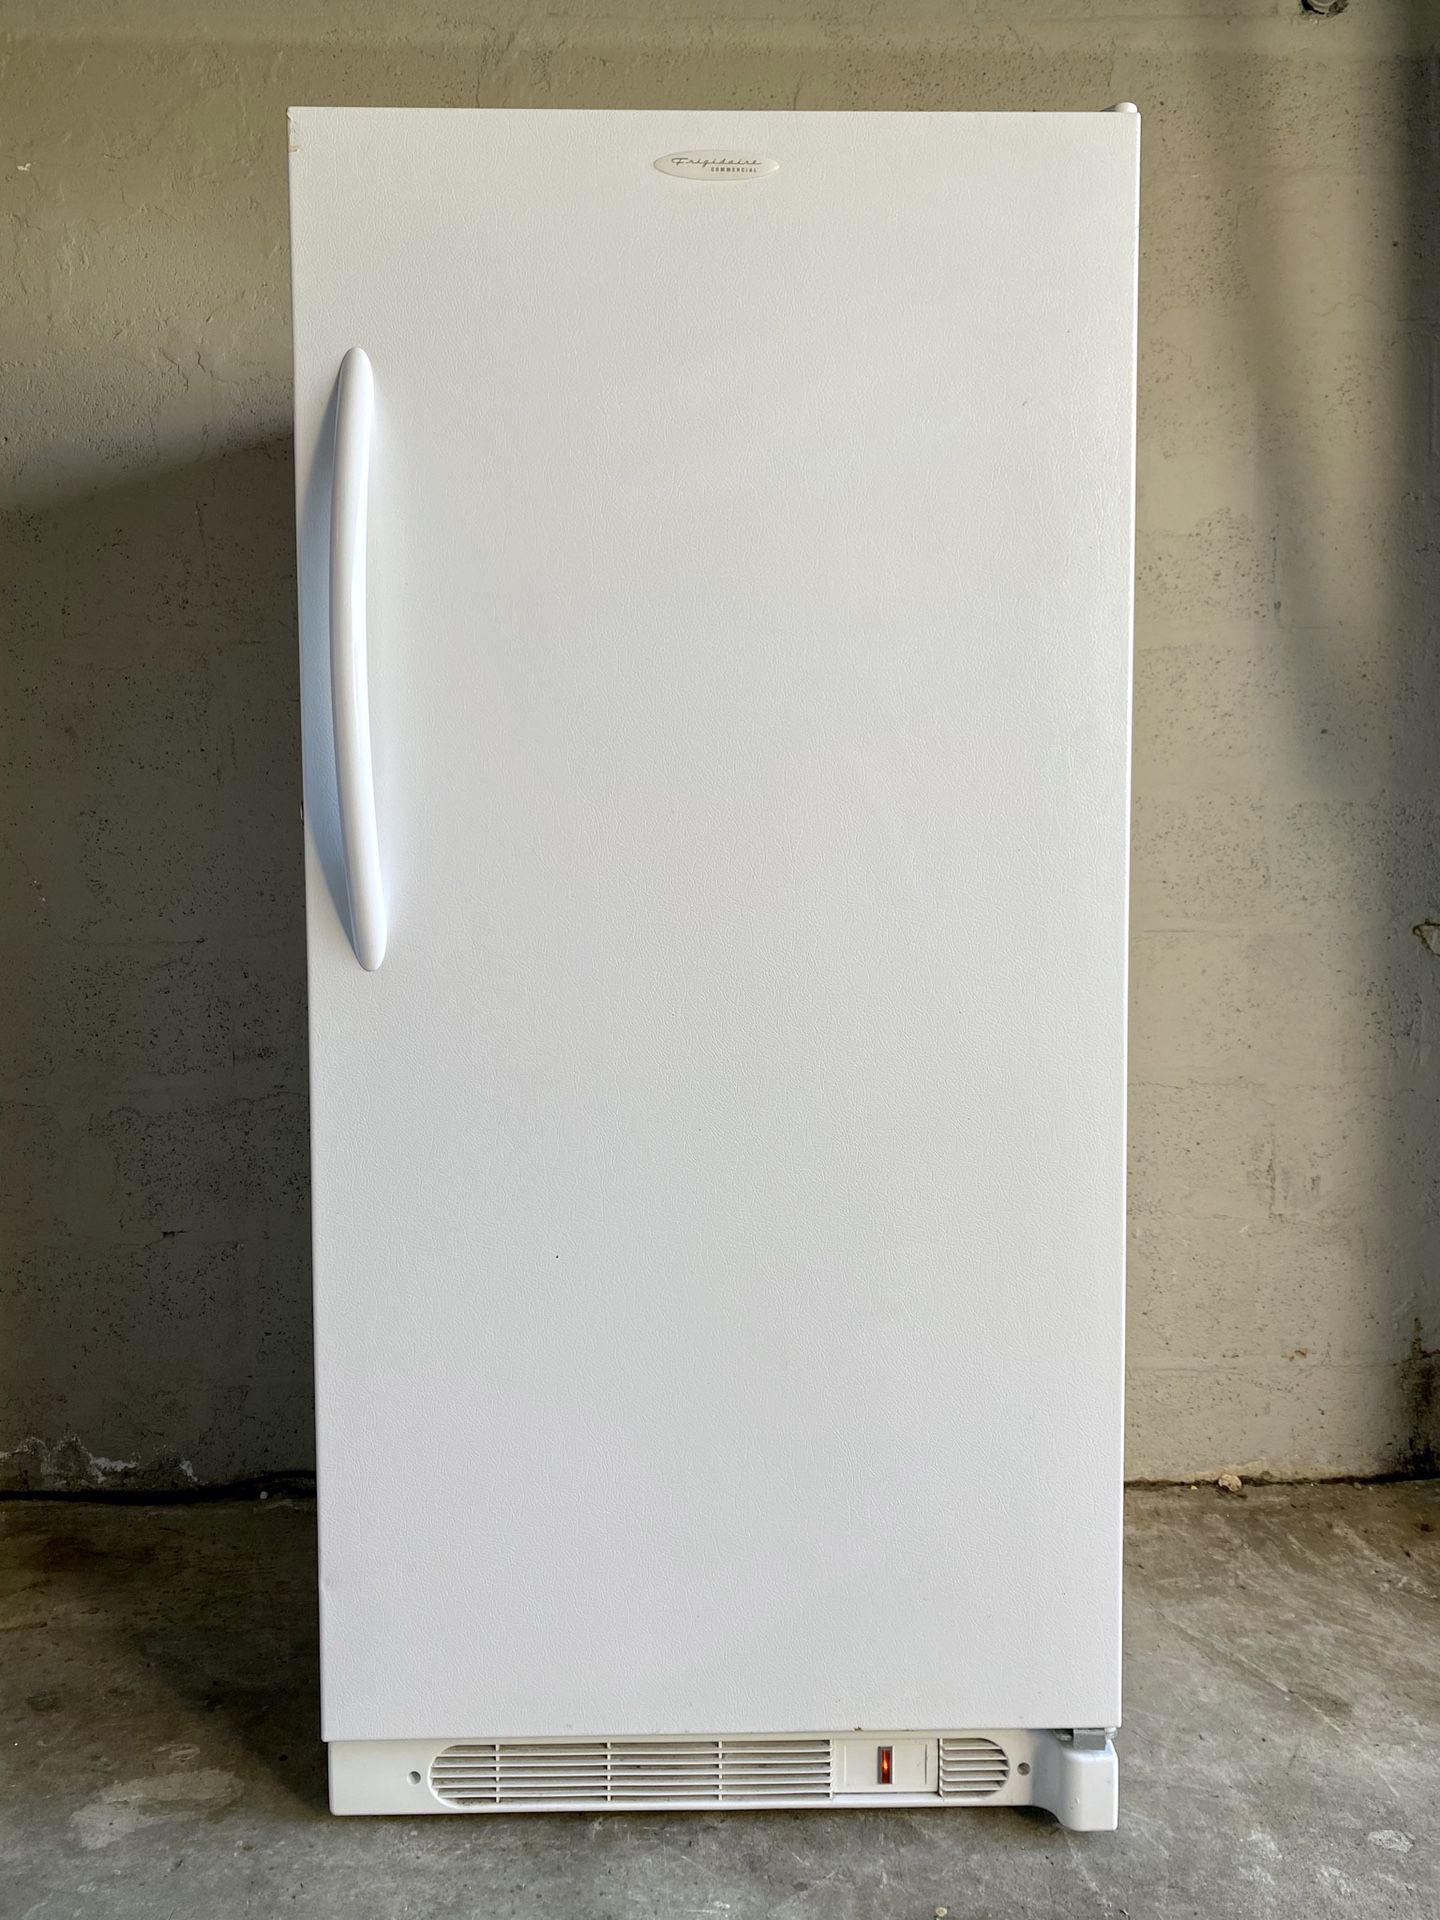 *Frost Free* 14.0 Cubic Ft Frigidaire Upright Freezer